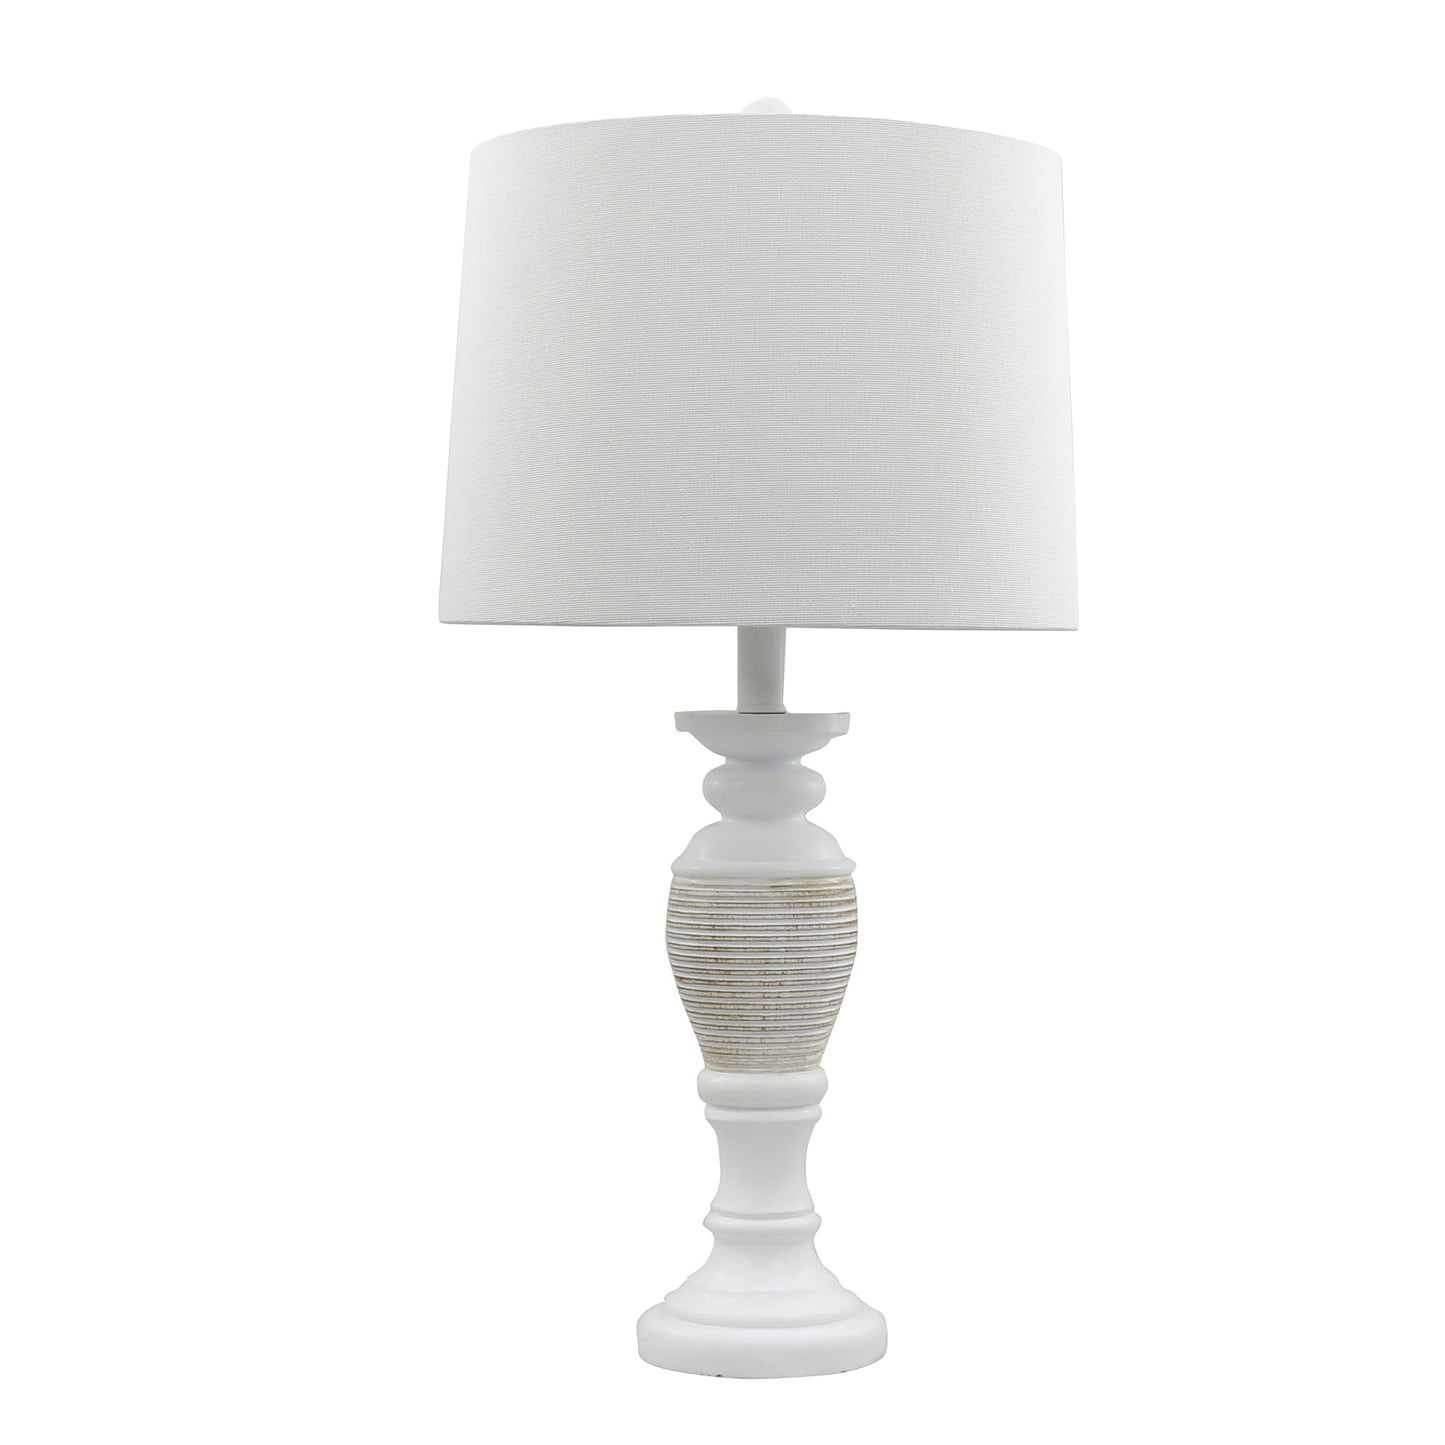 White Wooden Lamp with White Shade for sale - Woodcock and Cavendish